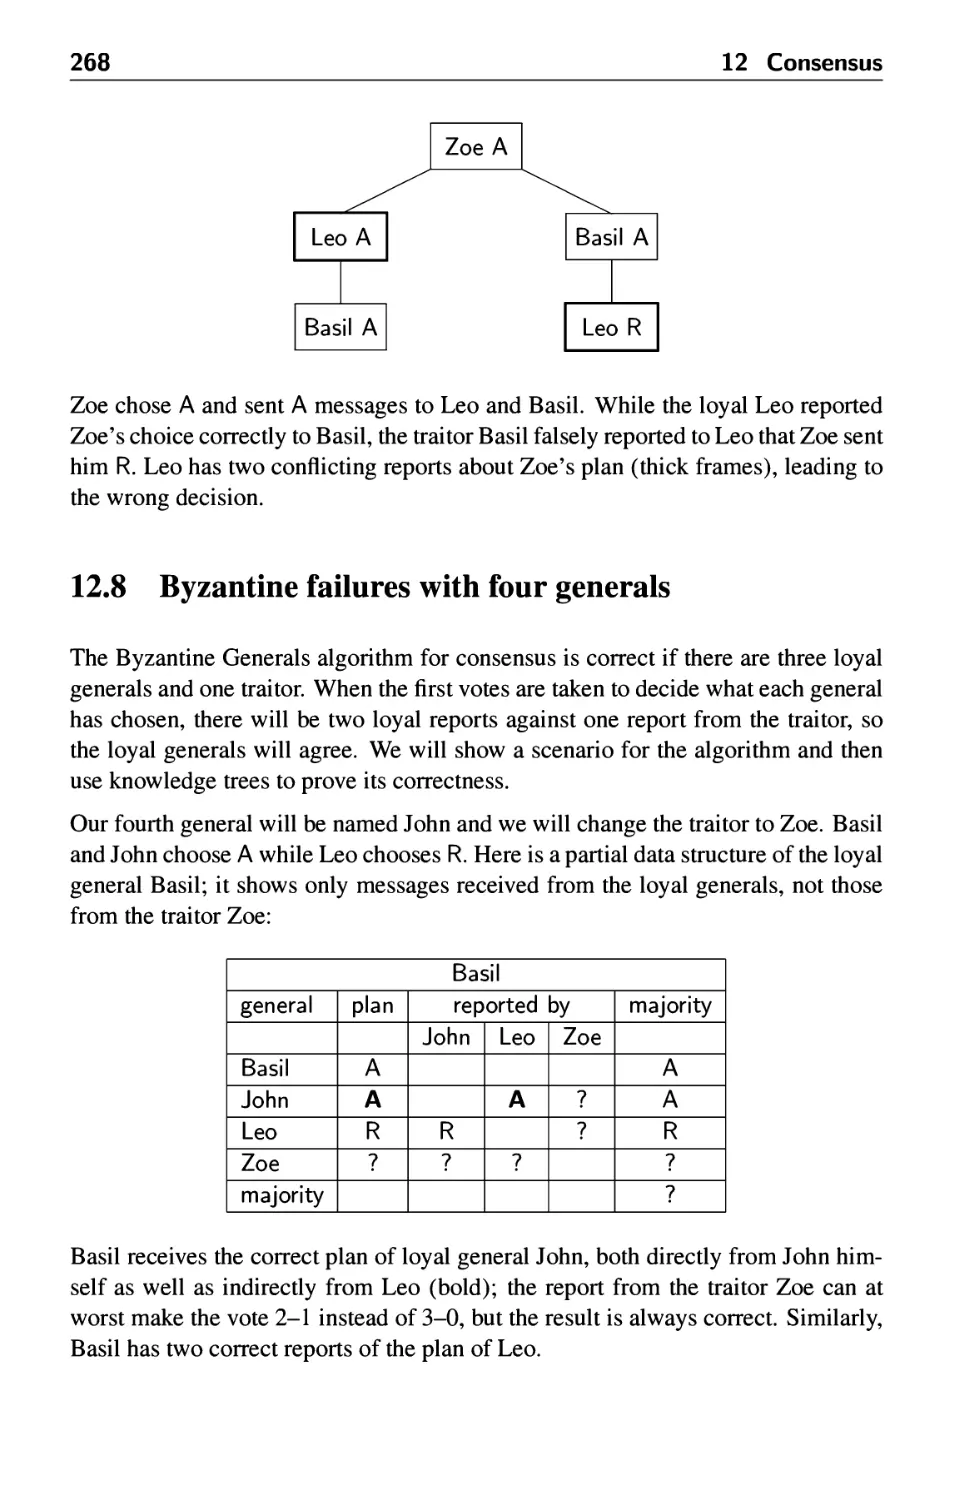 12.8 Byzantine failures with four generals